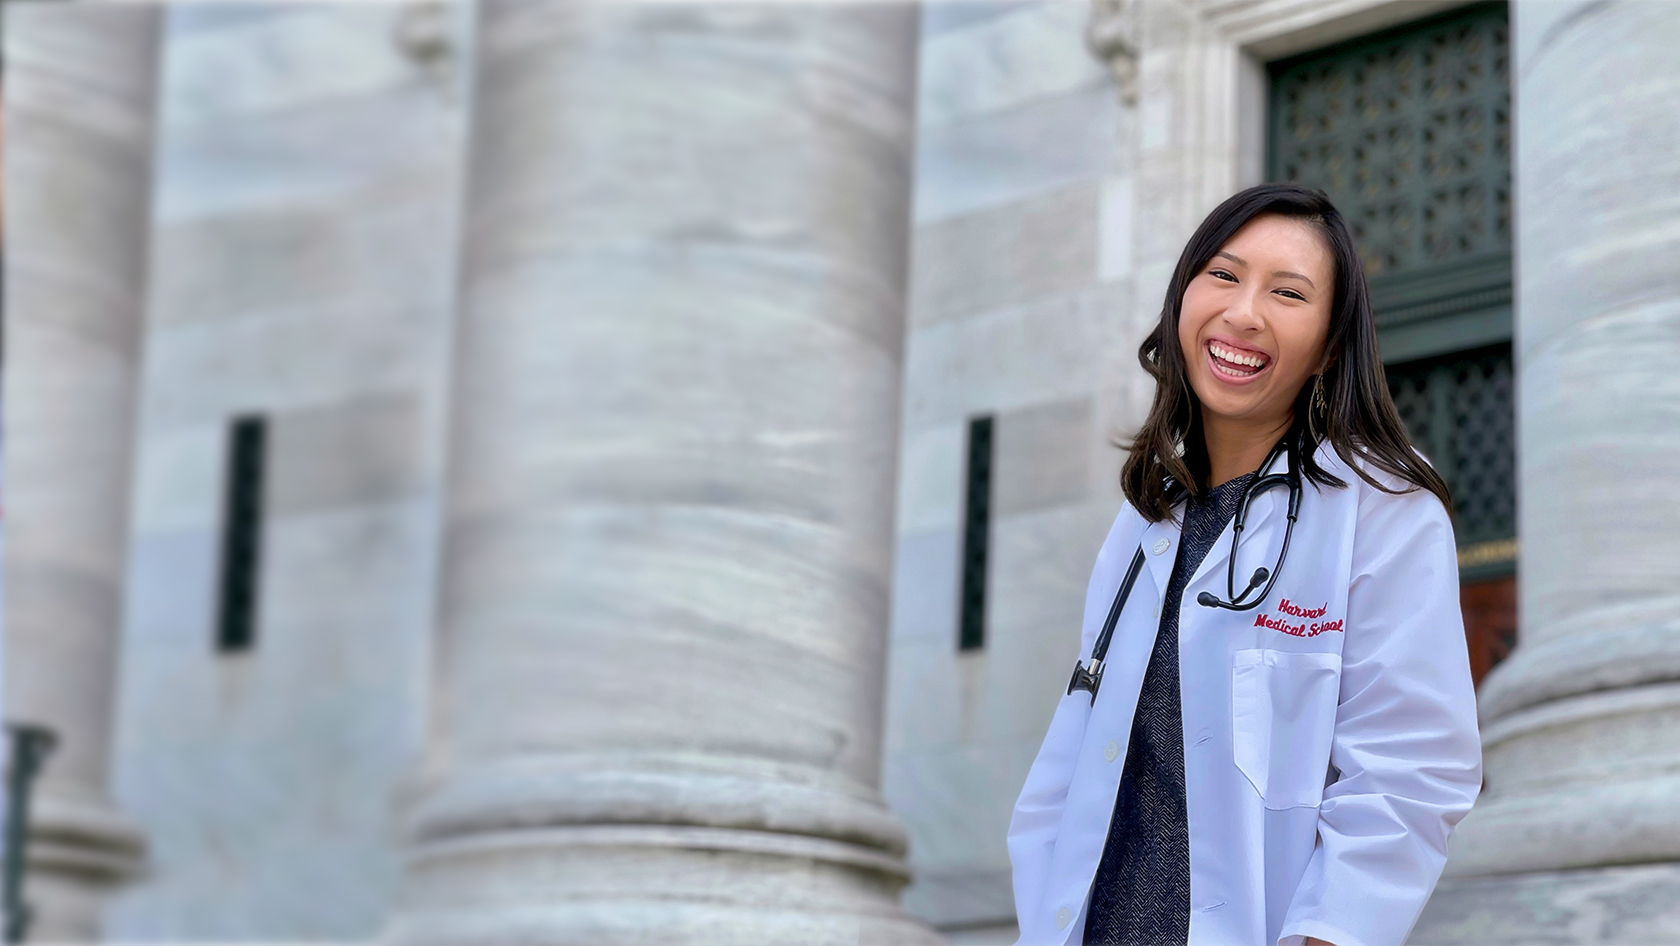 Person in lab coat and stethoscope laughing on steps of building with pillar in background